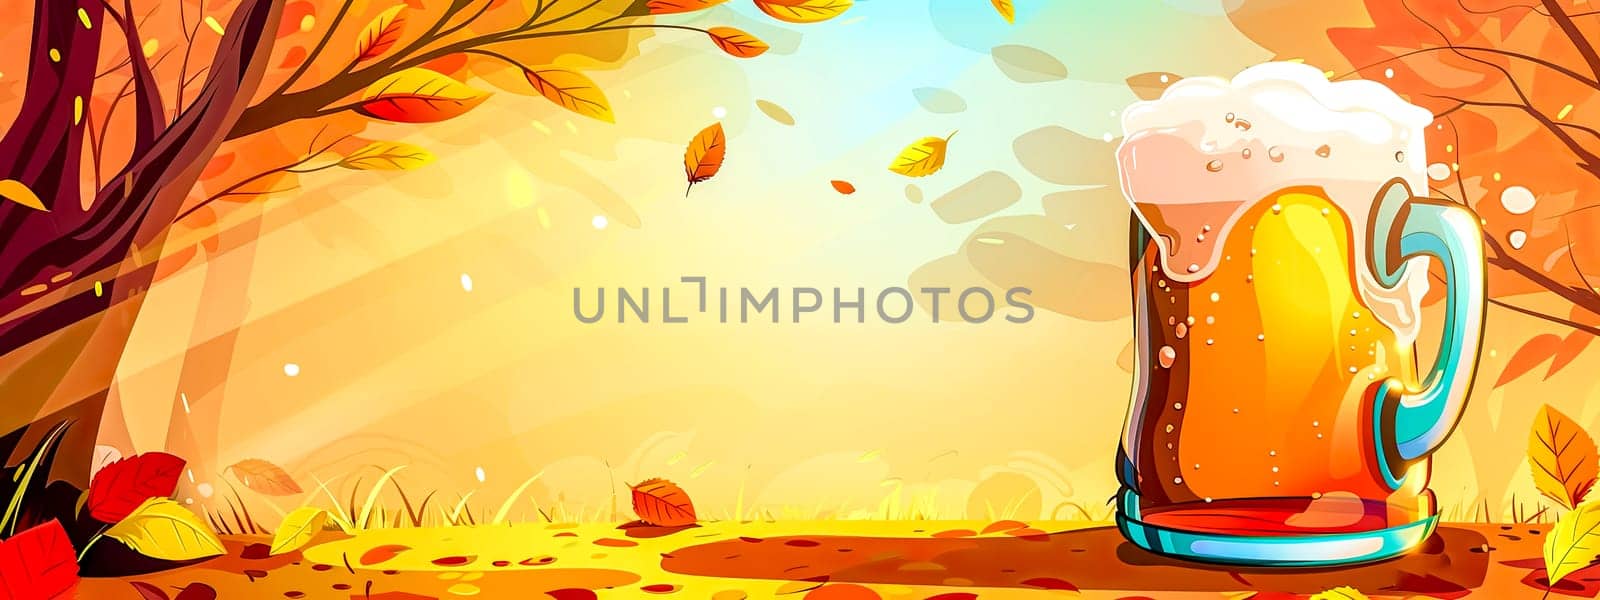 Illustration of a frothy beer mug with colorful autumn leaves background by Edophoto